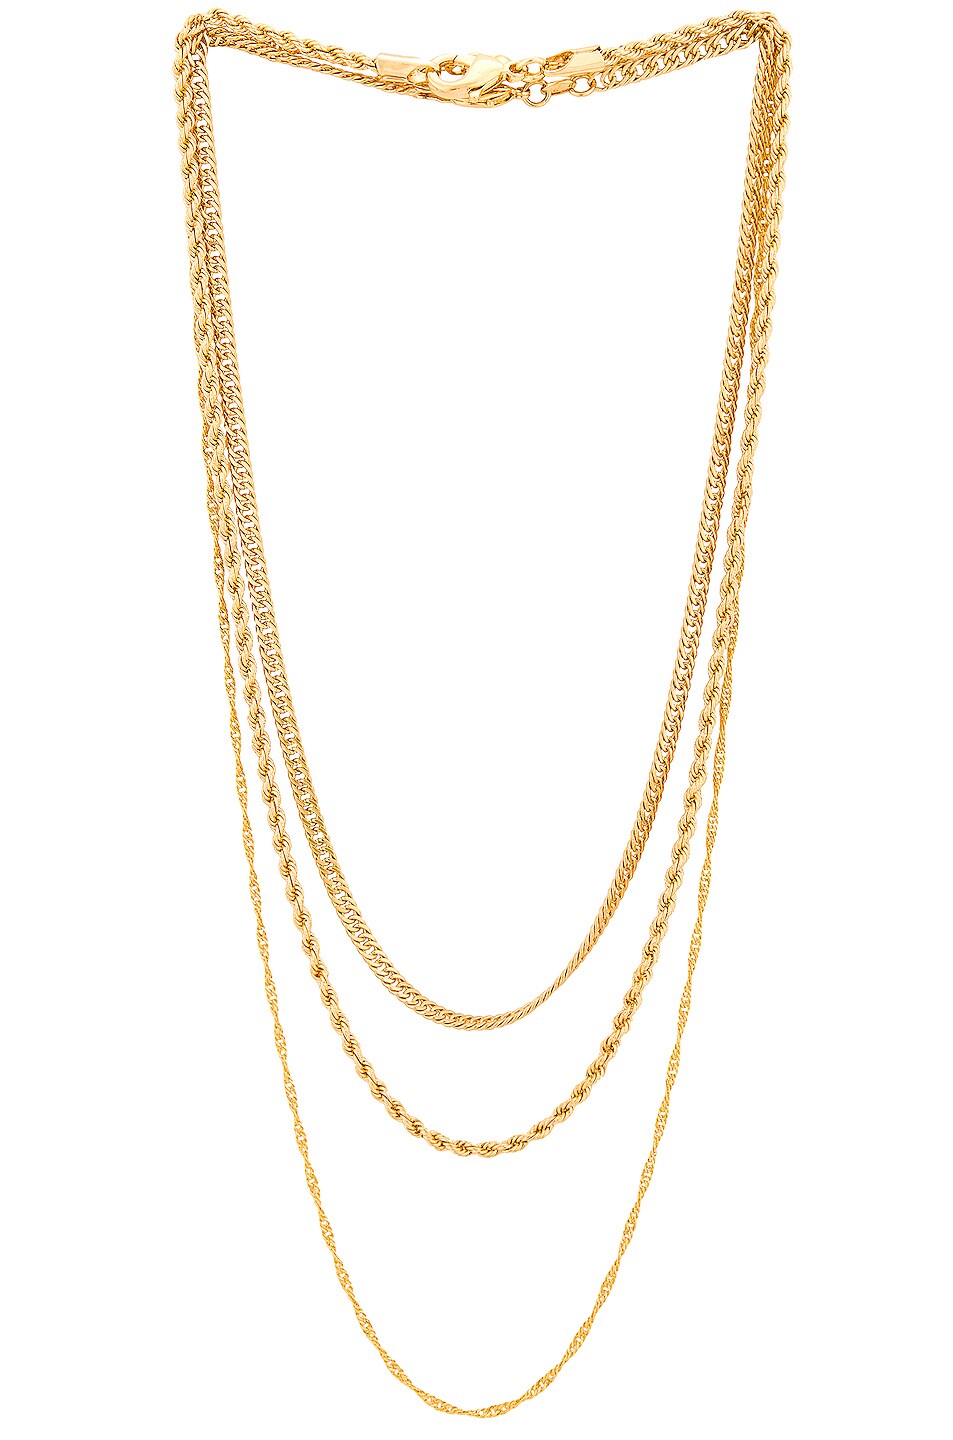 Image 1 of Jordan Road Jewelry St. Germain Necklace Stack in Gold